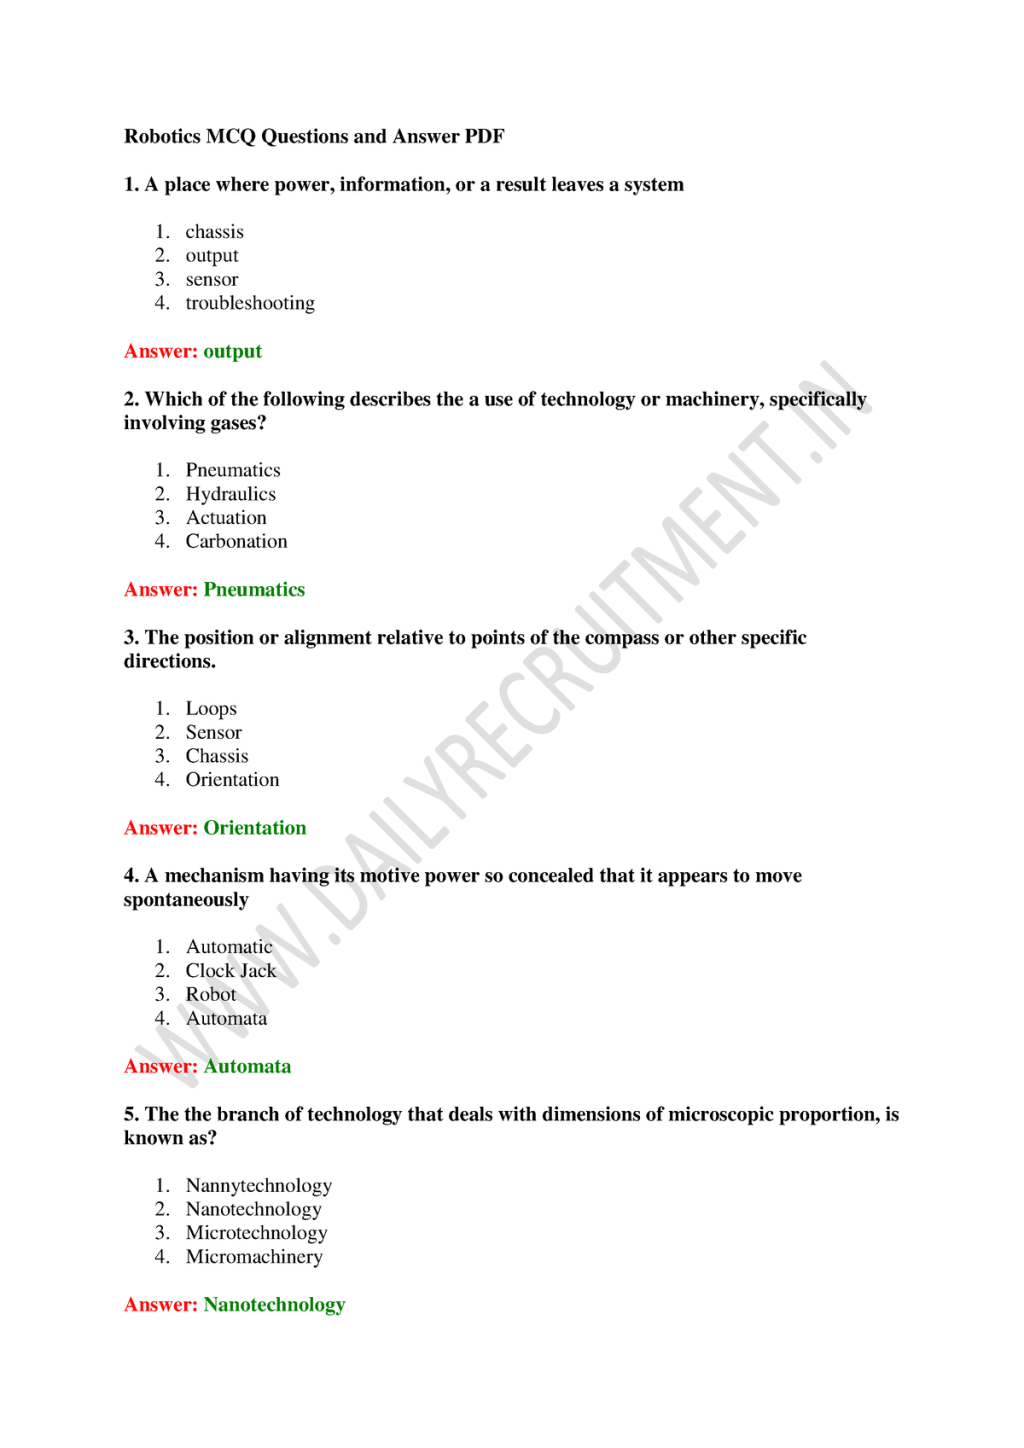 Picture of: Robotics MCQ Questions and Answer PDF – A place where power